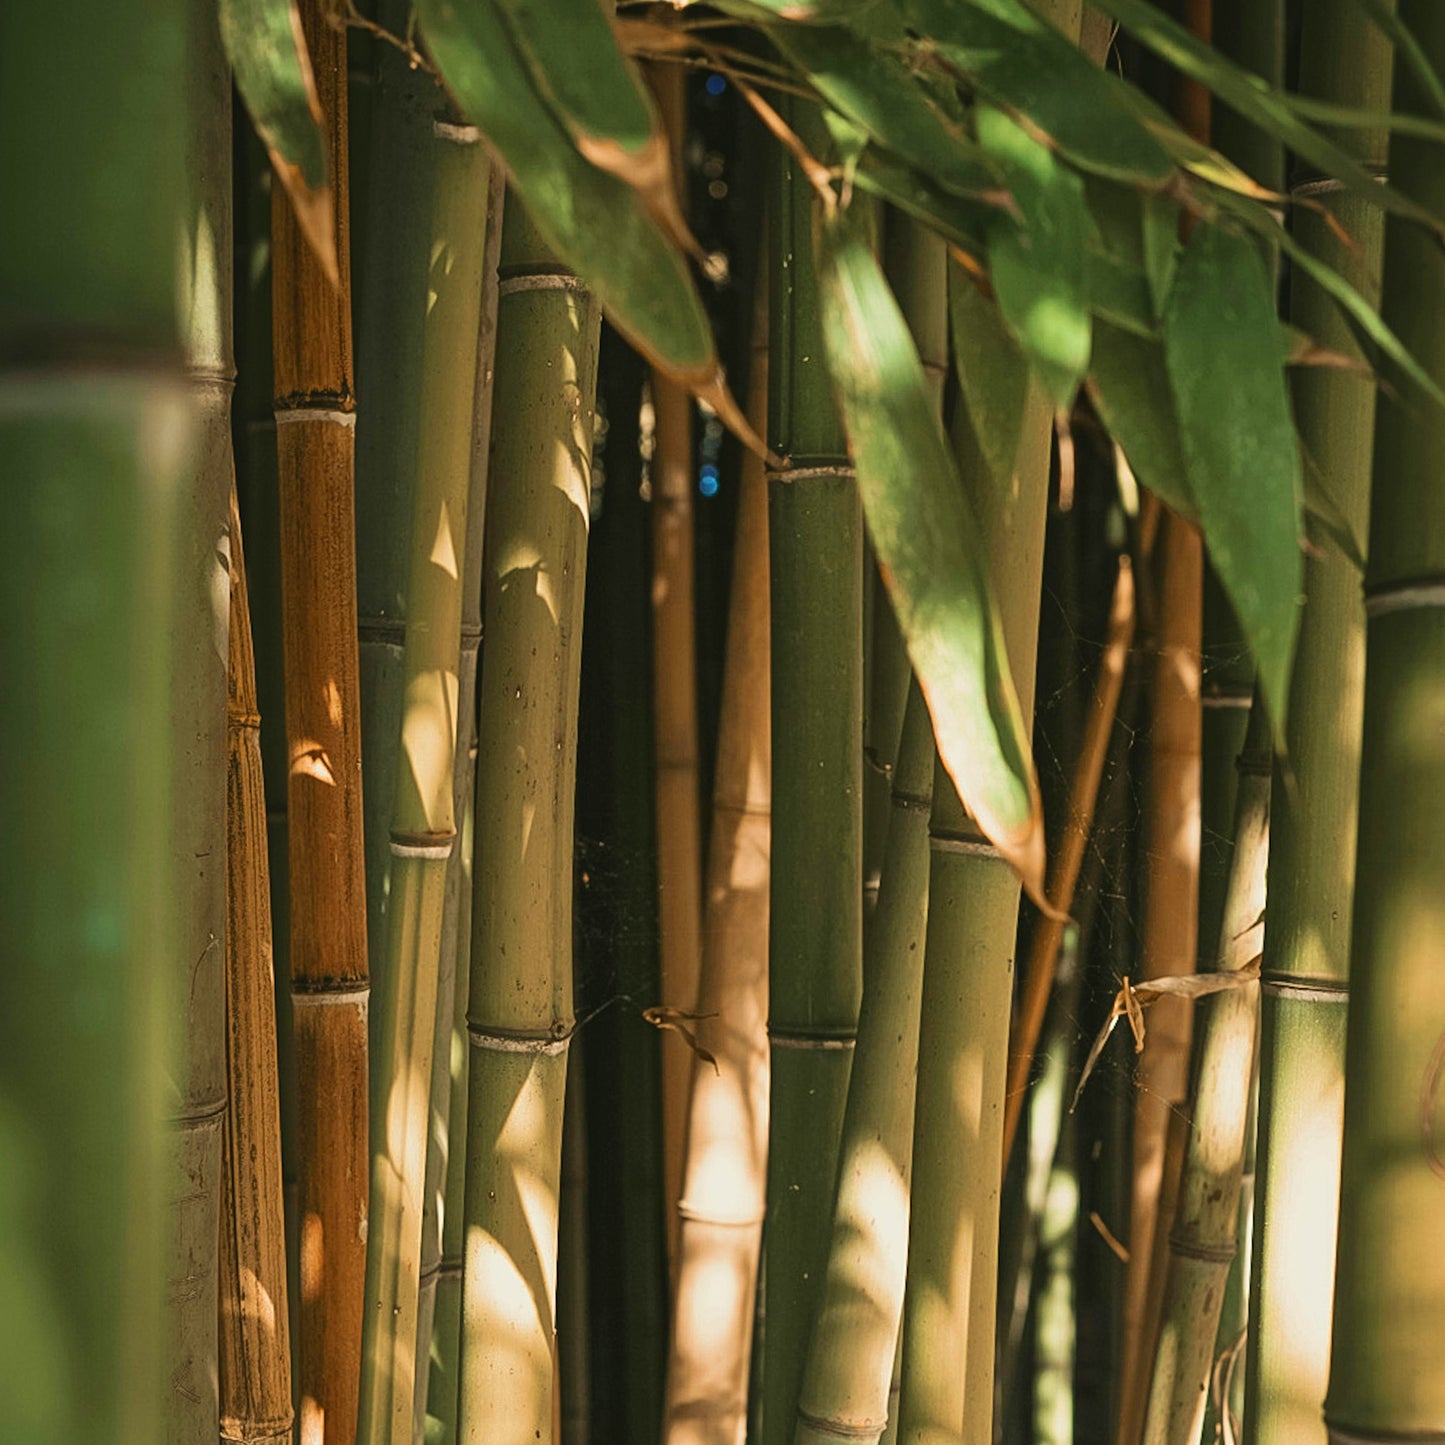 Bright green bamboo grows in the sun